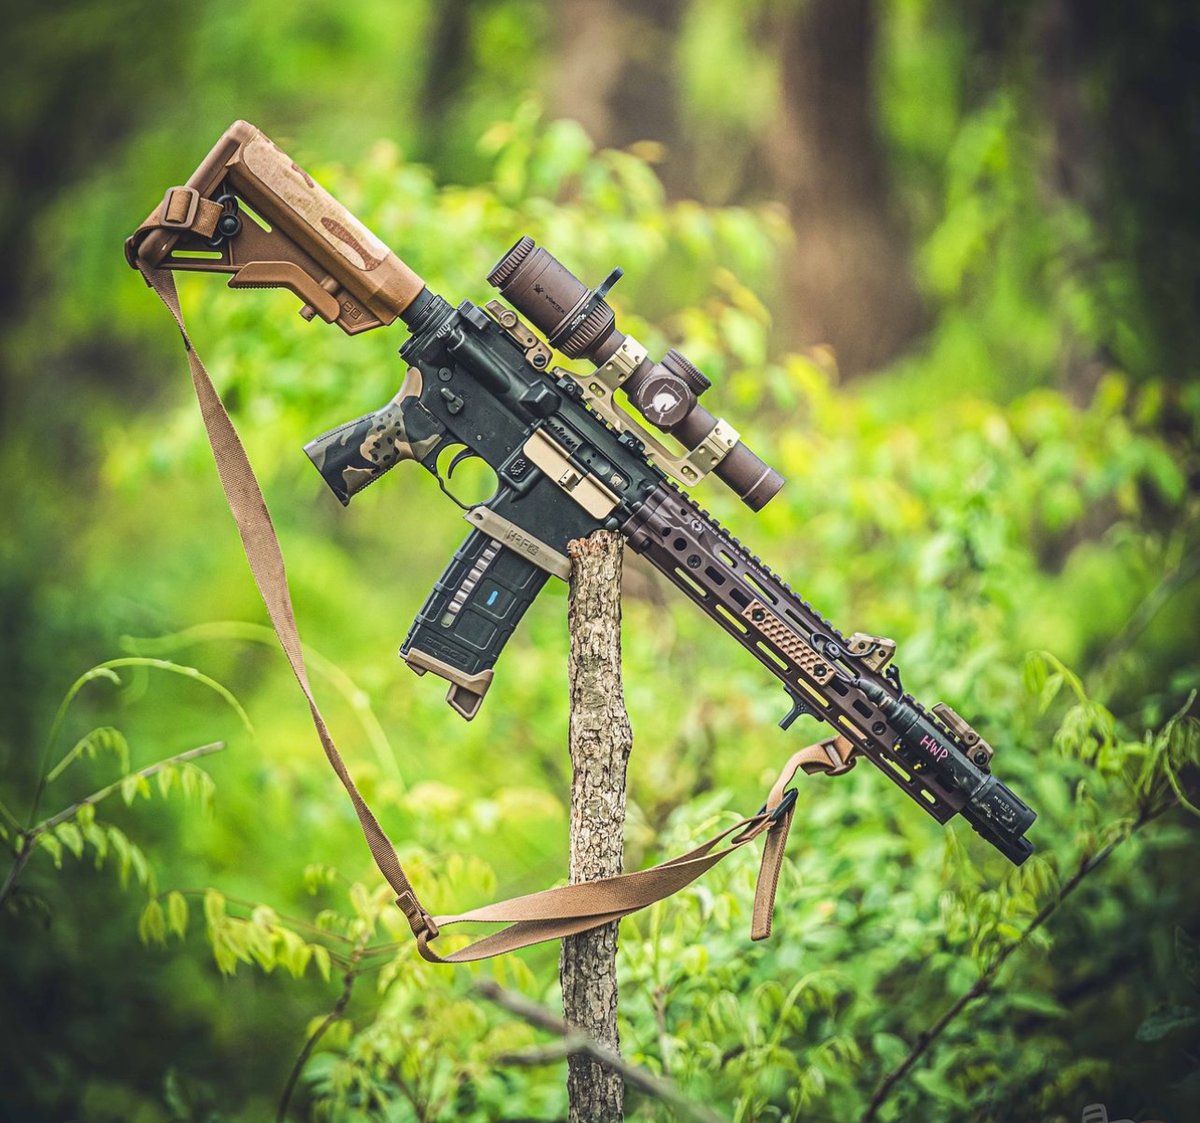 Make your build your own.

📸 = @holtworks on IG

#brownells #buildbetter #vortexoptics #b5systems #magpul